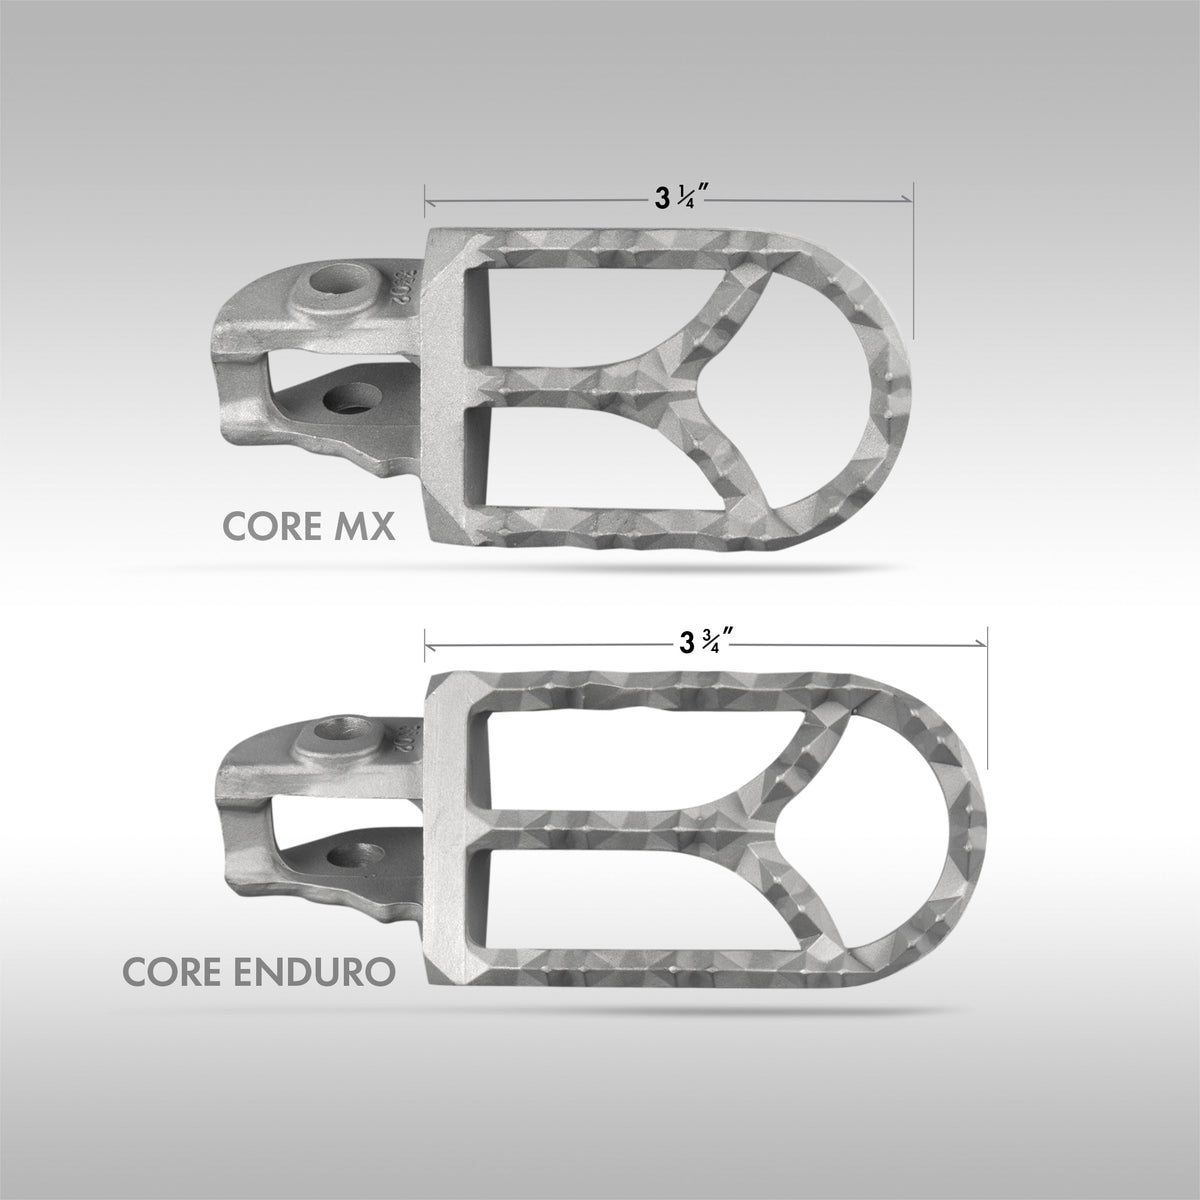 IMS PRODUCTS - CORE MX FOOT PEGS - HONDA